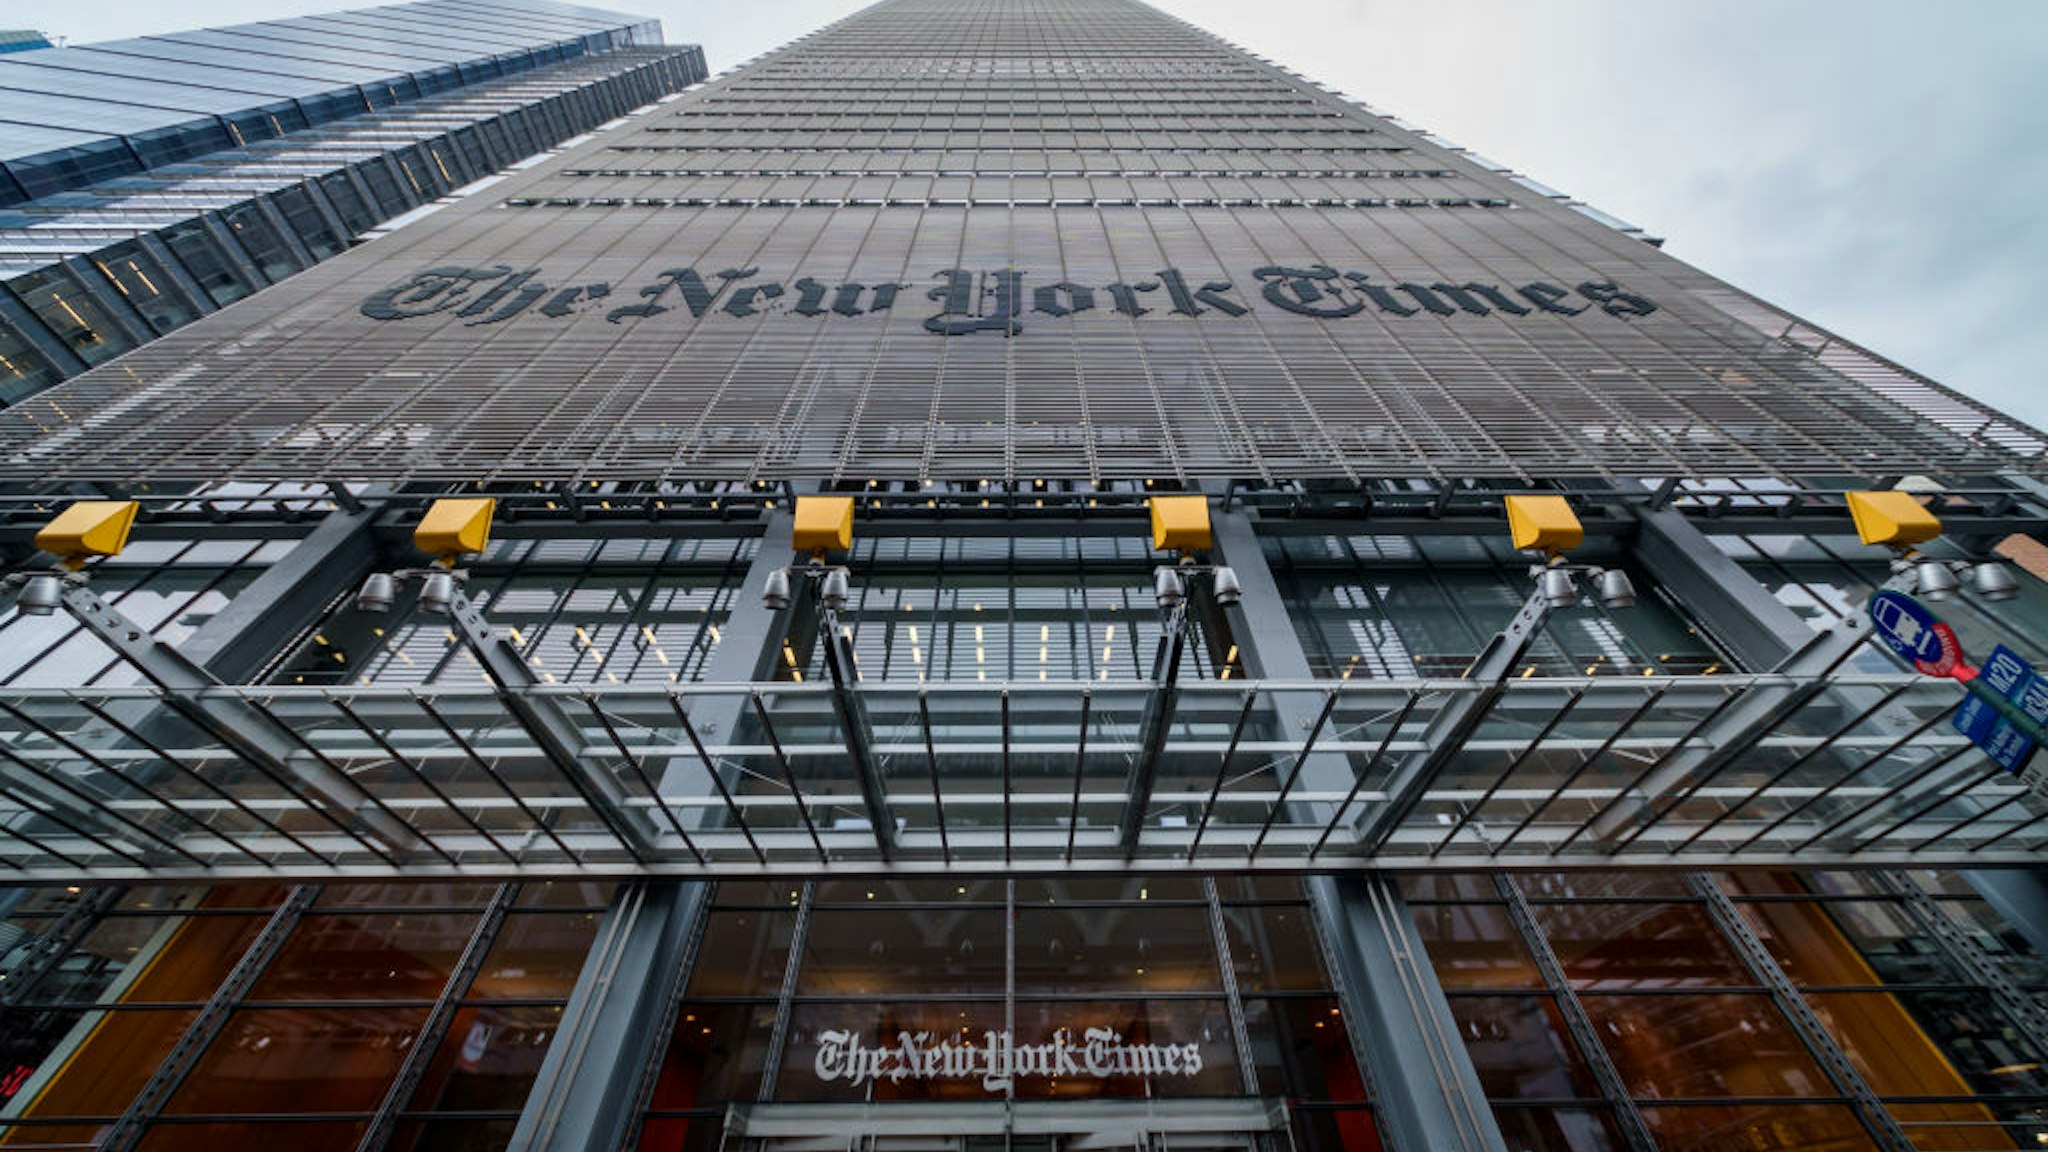 NEW YORK TIMES HEADQUARTERS, NEW YORK, UNITED STATES - 2019/04/29: New York Times Headquarters - Jewish organizations held a protest outside The New York Times offices, over the alleged anti-Semitic cartoon published in the newspaper depicting Israeli Prime Minister Benjamin Netanyahu as a dog on a leash held by a blind President Donald Trump.